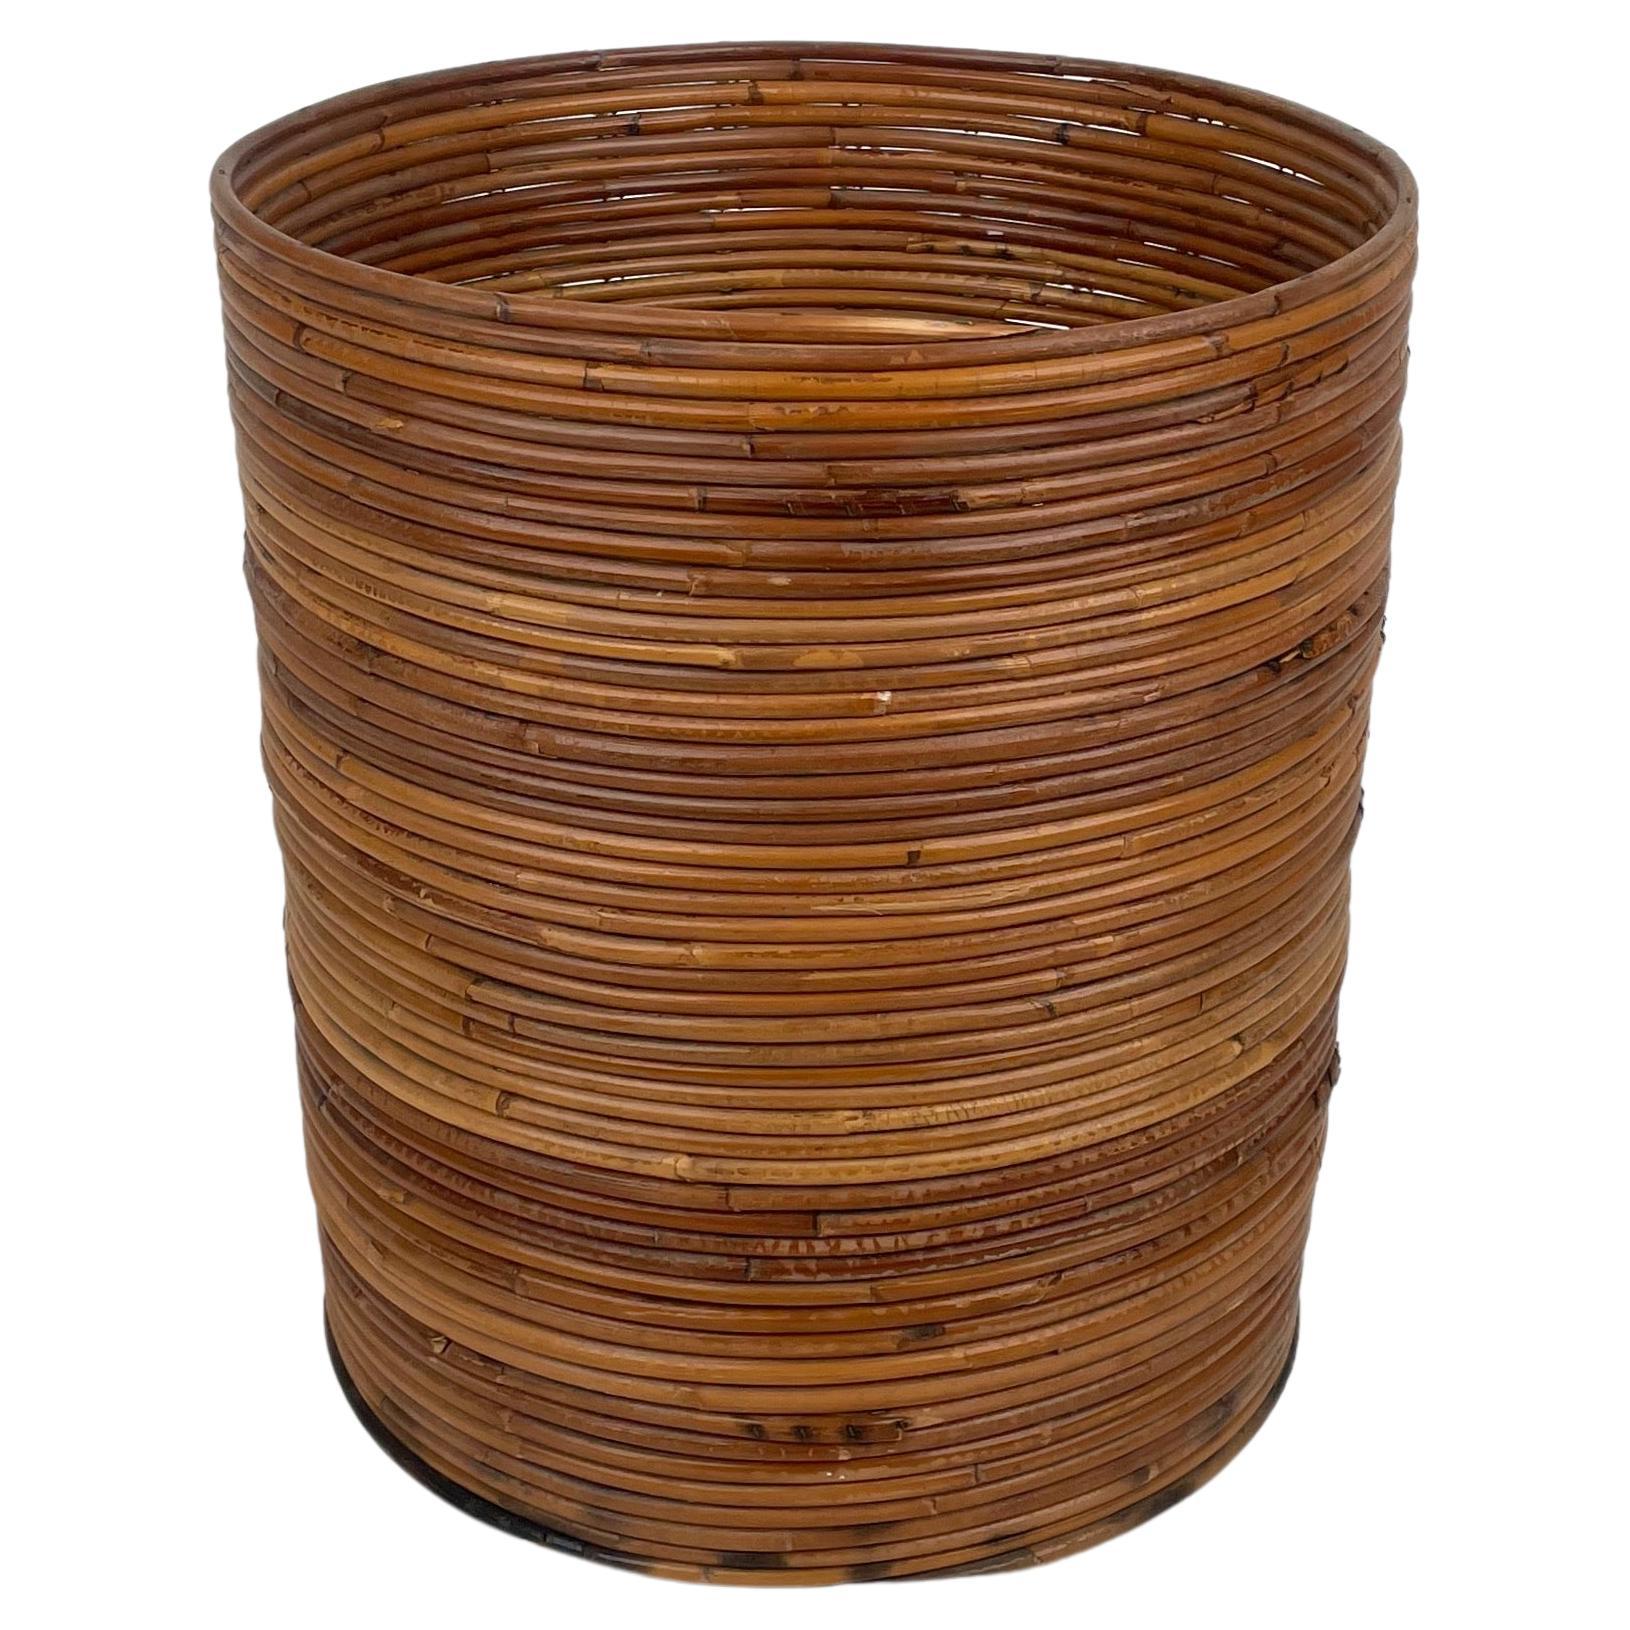 Rattan and Bamboo Round Basket Plant Holder Vase, Italy, 1960s